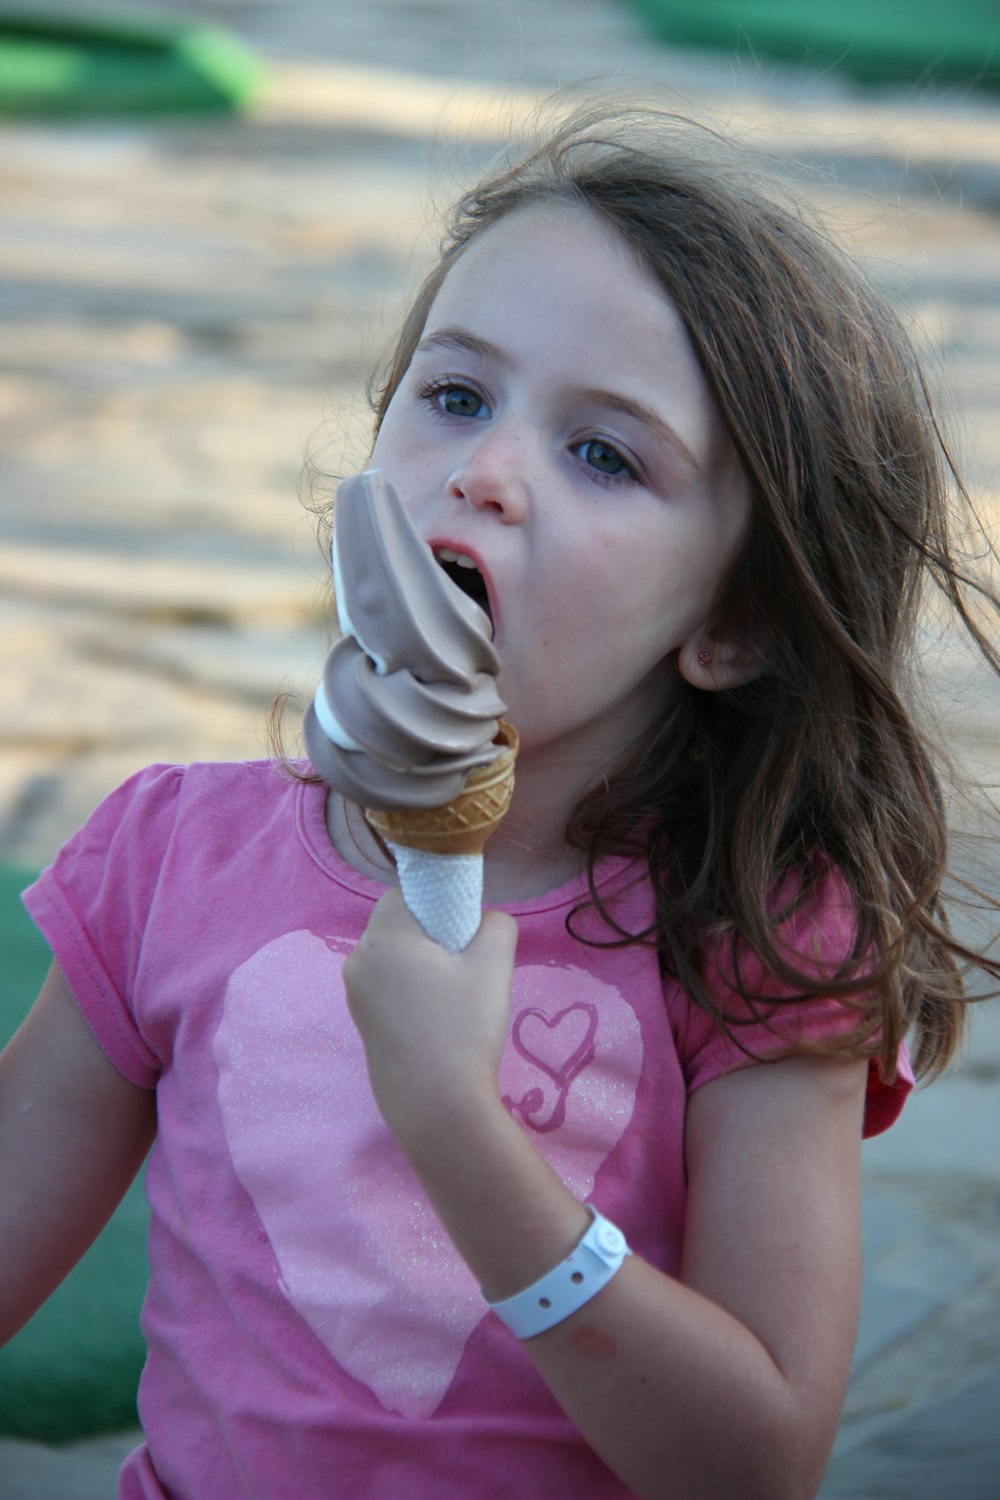 girl in pink t-shirt holding ice cream cone